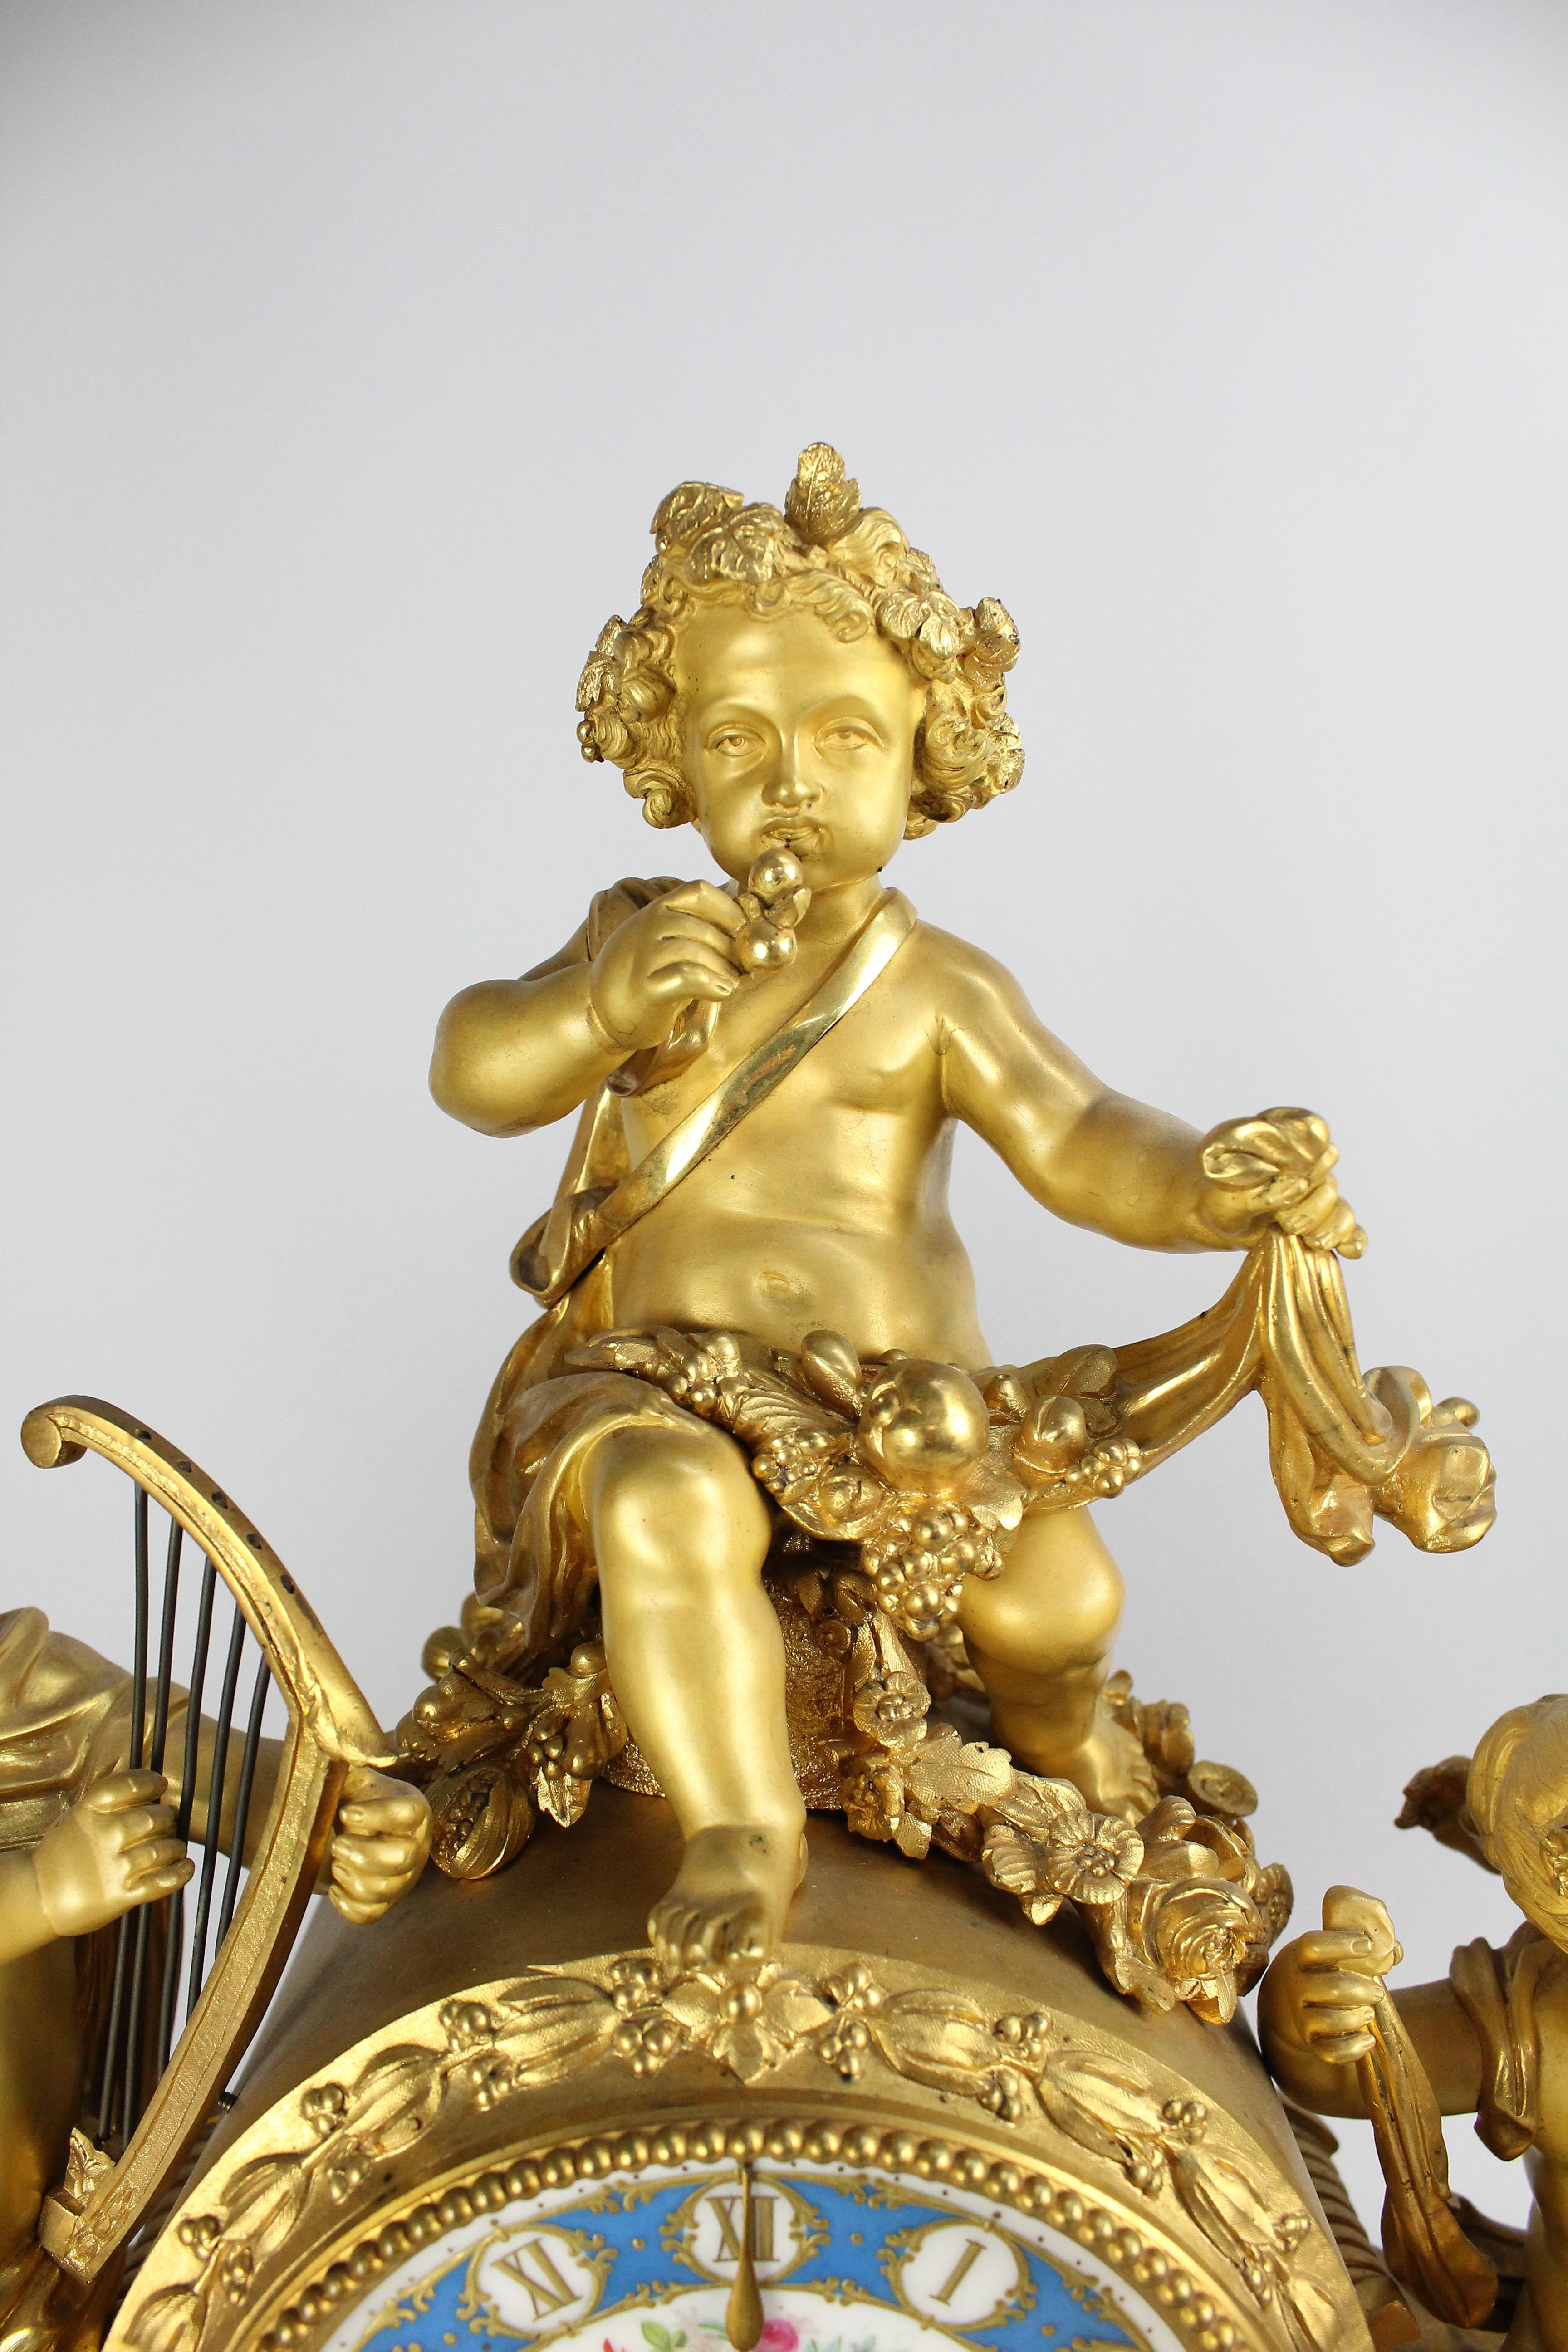 The young Bacchus and friends are entertaining themselves with grapes and music.

Large and impressive bronze mantel clock. French late 19th century. The movement is signed 